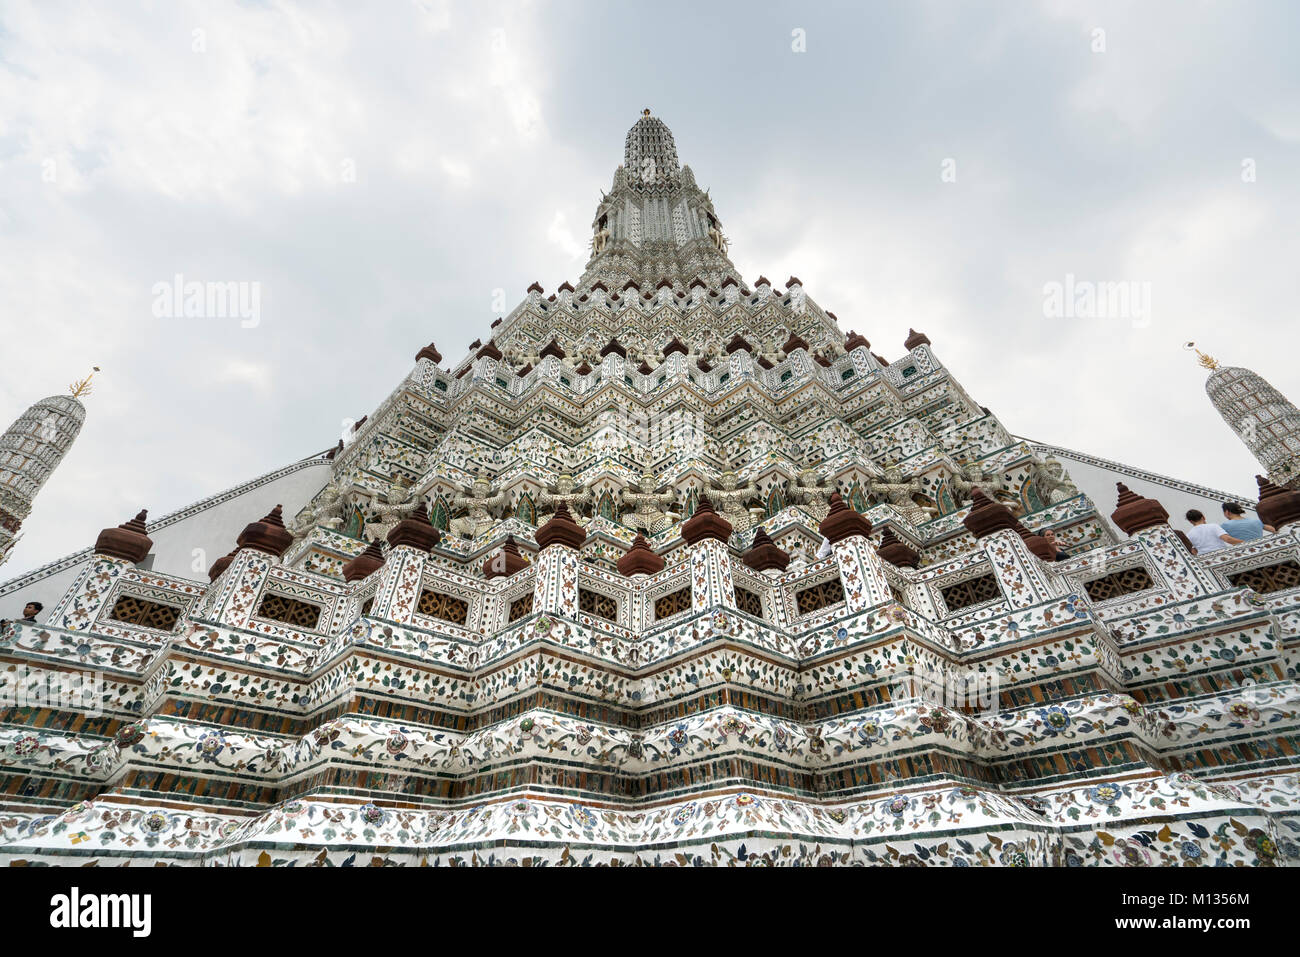 A detail of external decorations of Wat Arun temple in Bangkok, Thailand Stock Photo